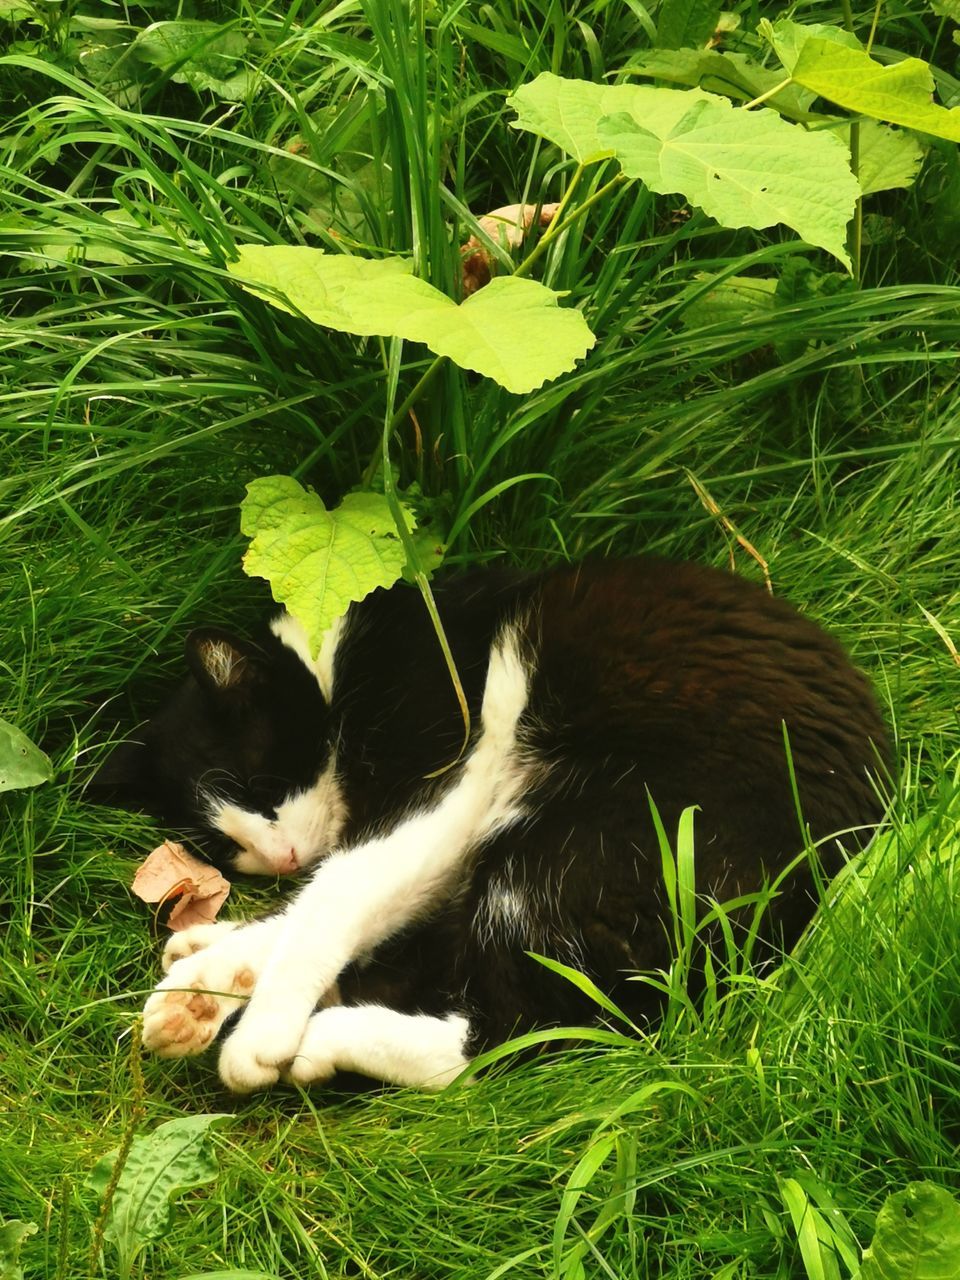 animal, animal themes, mammal, plant, grass, cat, one animal, green, pet, domestic animals, nature, no people, relaxation, growth, day, high angle view, feline, lying down, domestic cat, flower, field, resting, plant part, land, outdoors, leaf